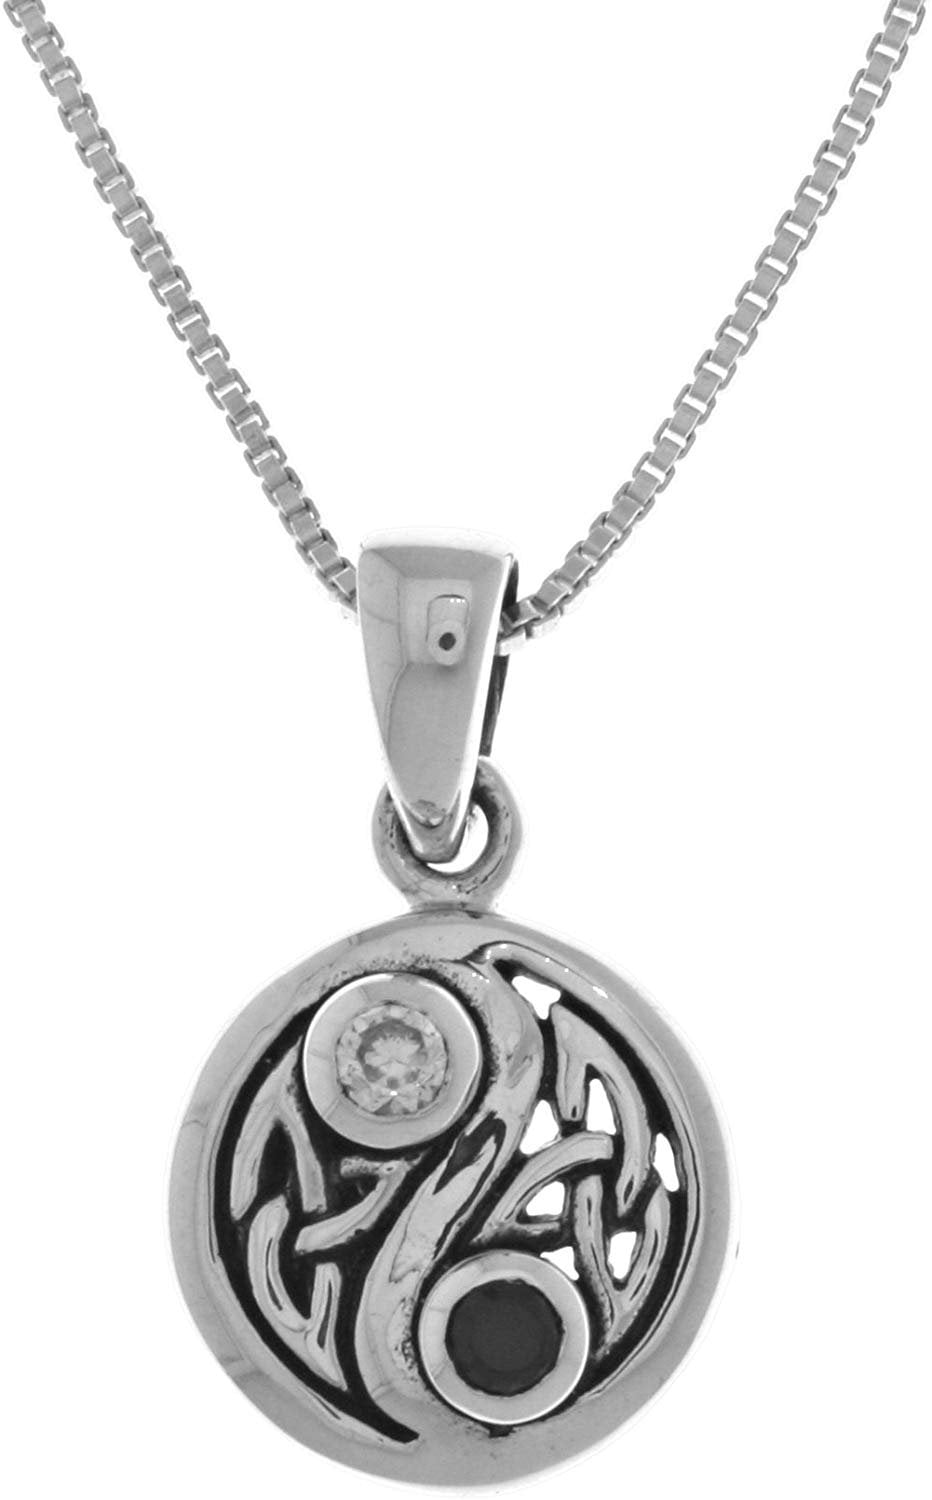 Flowing Sun Yin-Yang Celtic Knot Pendant Sterling Silver 18 Chain Necklace 